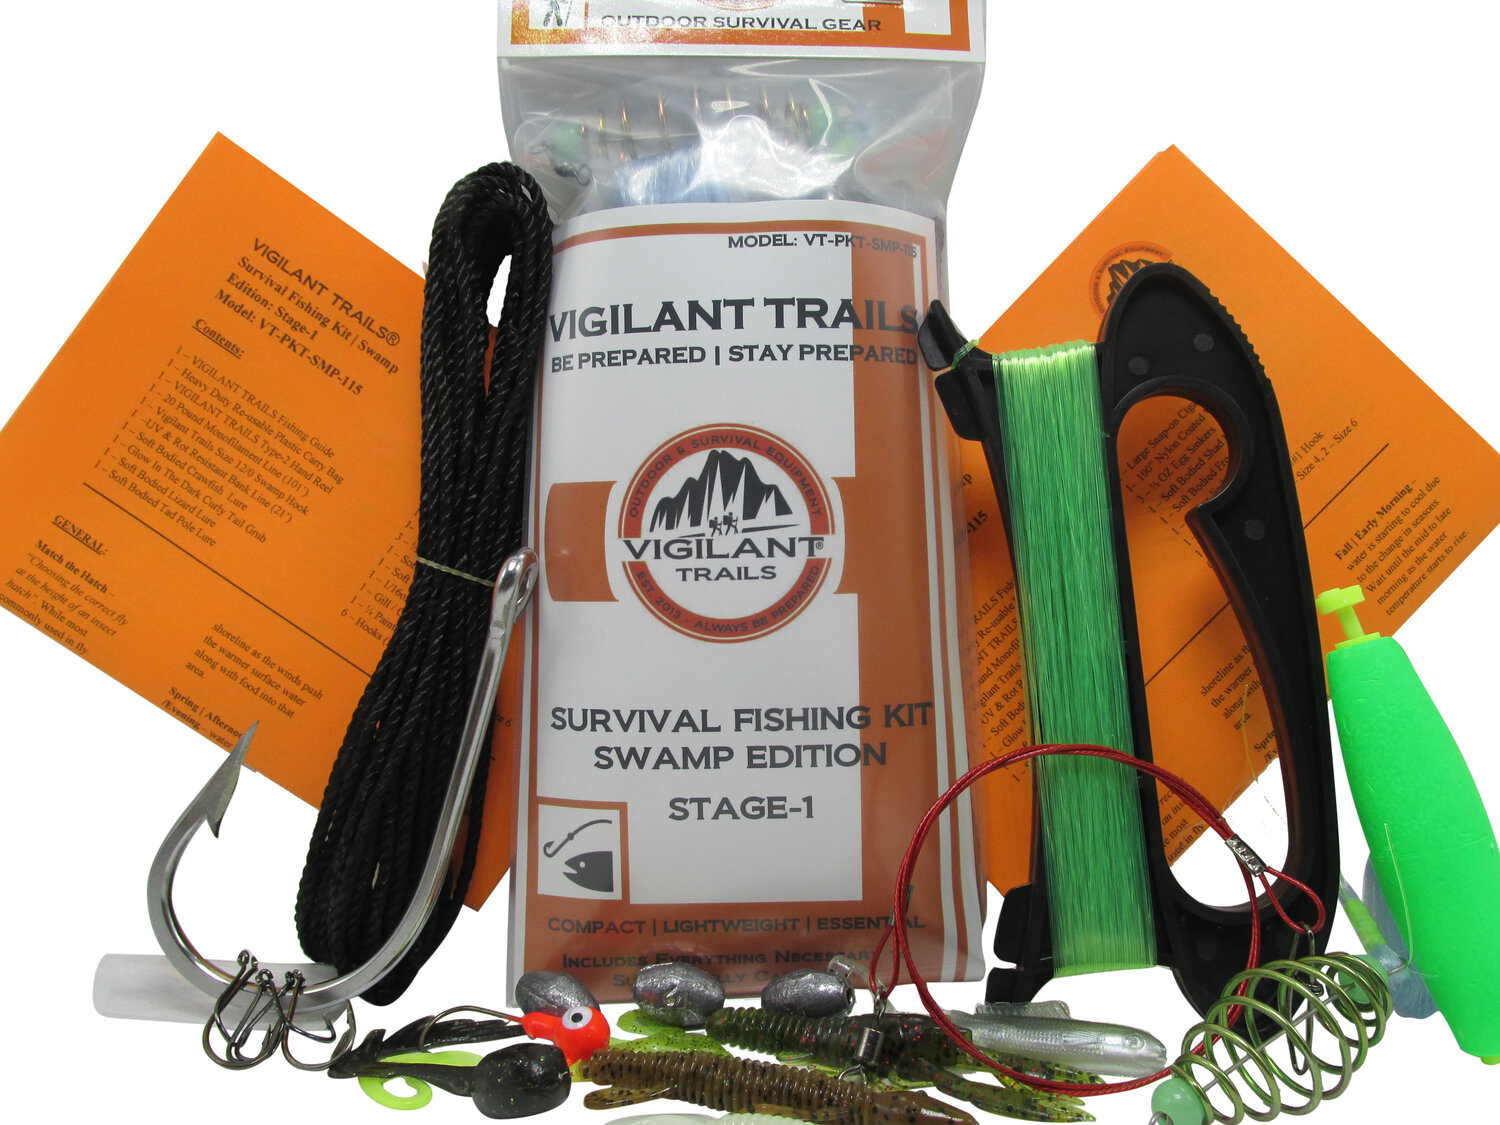 Vigilant Trails® Pre-Packed Survival Fishing Kit Swamp Edition: Stage-1, Includes Type-2 Hand Reel to Keep Your Line Organized, Heavy Duty Terminal  Tackle, Large Lures, Swamp Hook